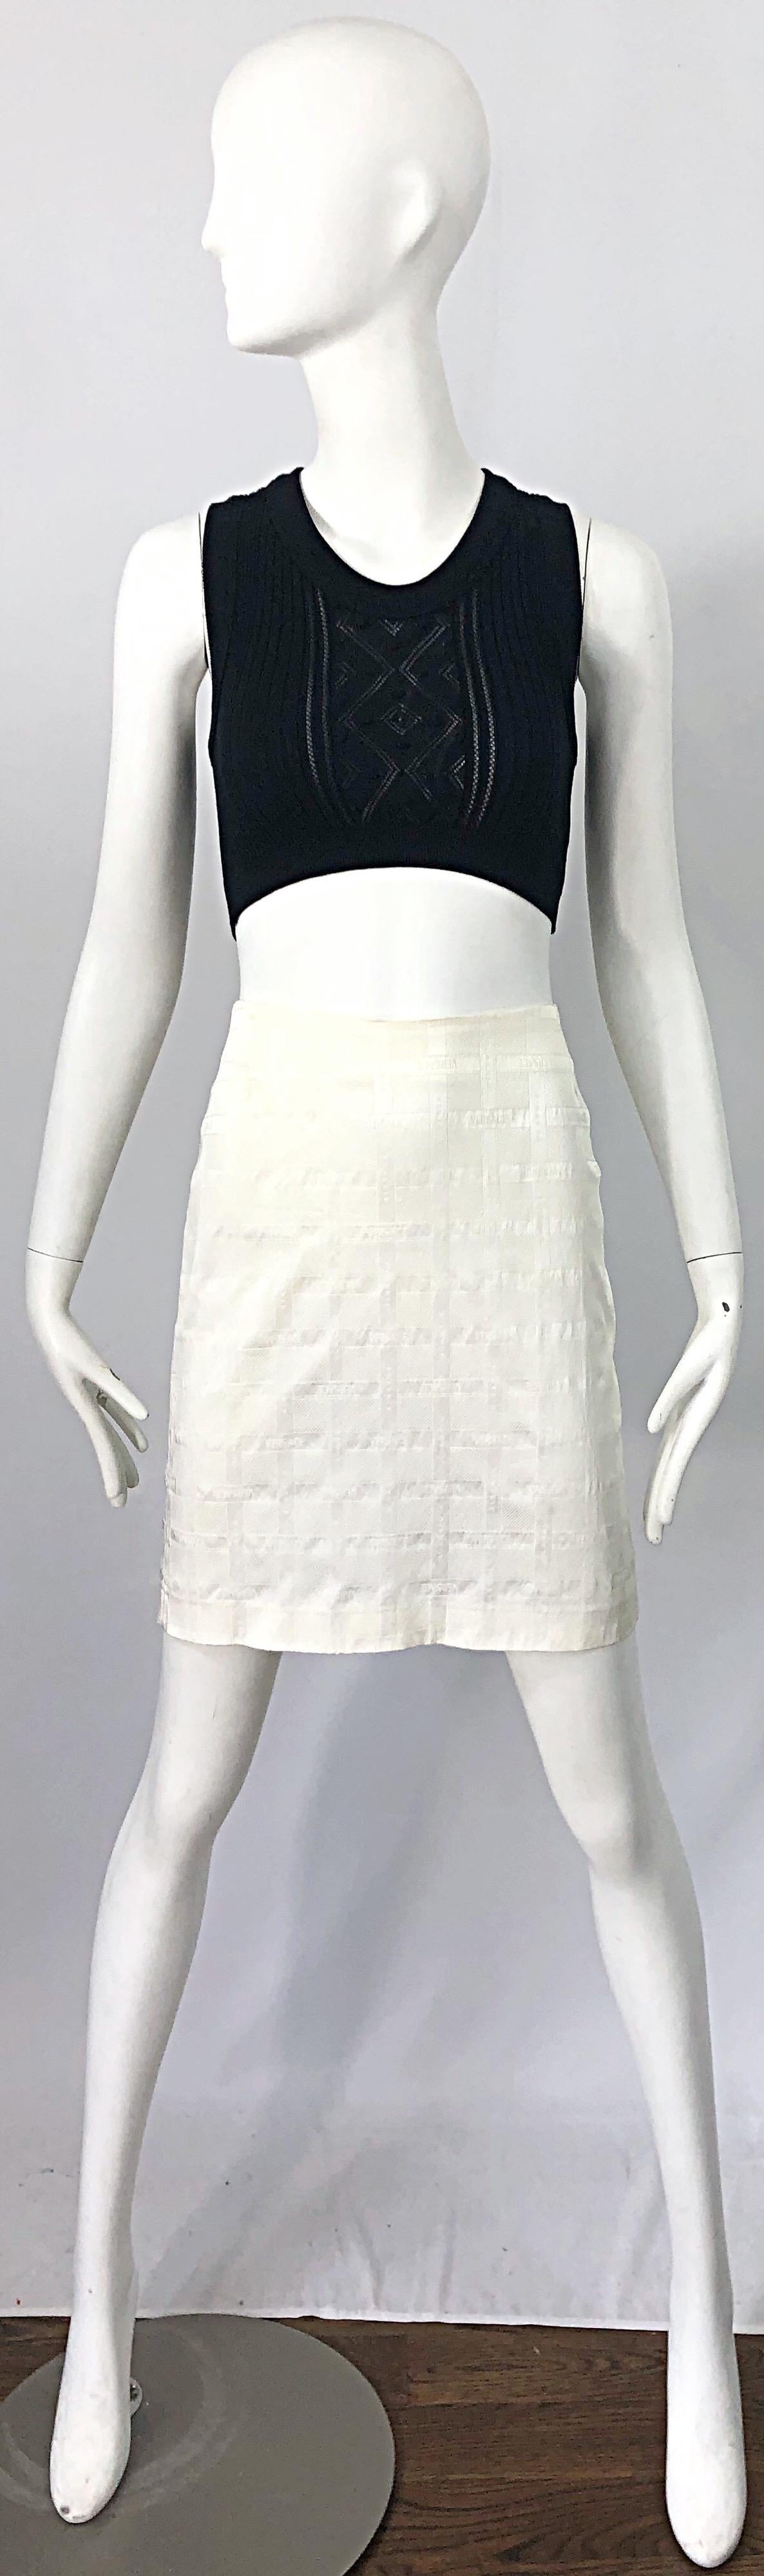 Sexy late 1990s GIANNI VERSACE white logo print high waist mini skirt! Features Squares that spell out Versace throughout. Hidden zipper up the back with hook-and-eye closure. Can easily be dressed up or down, day or evening. The pictured vintage